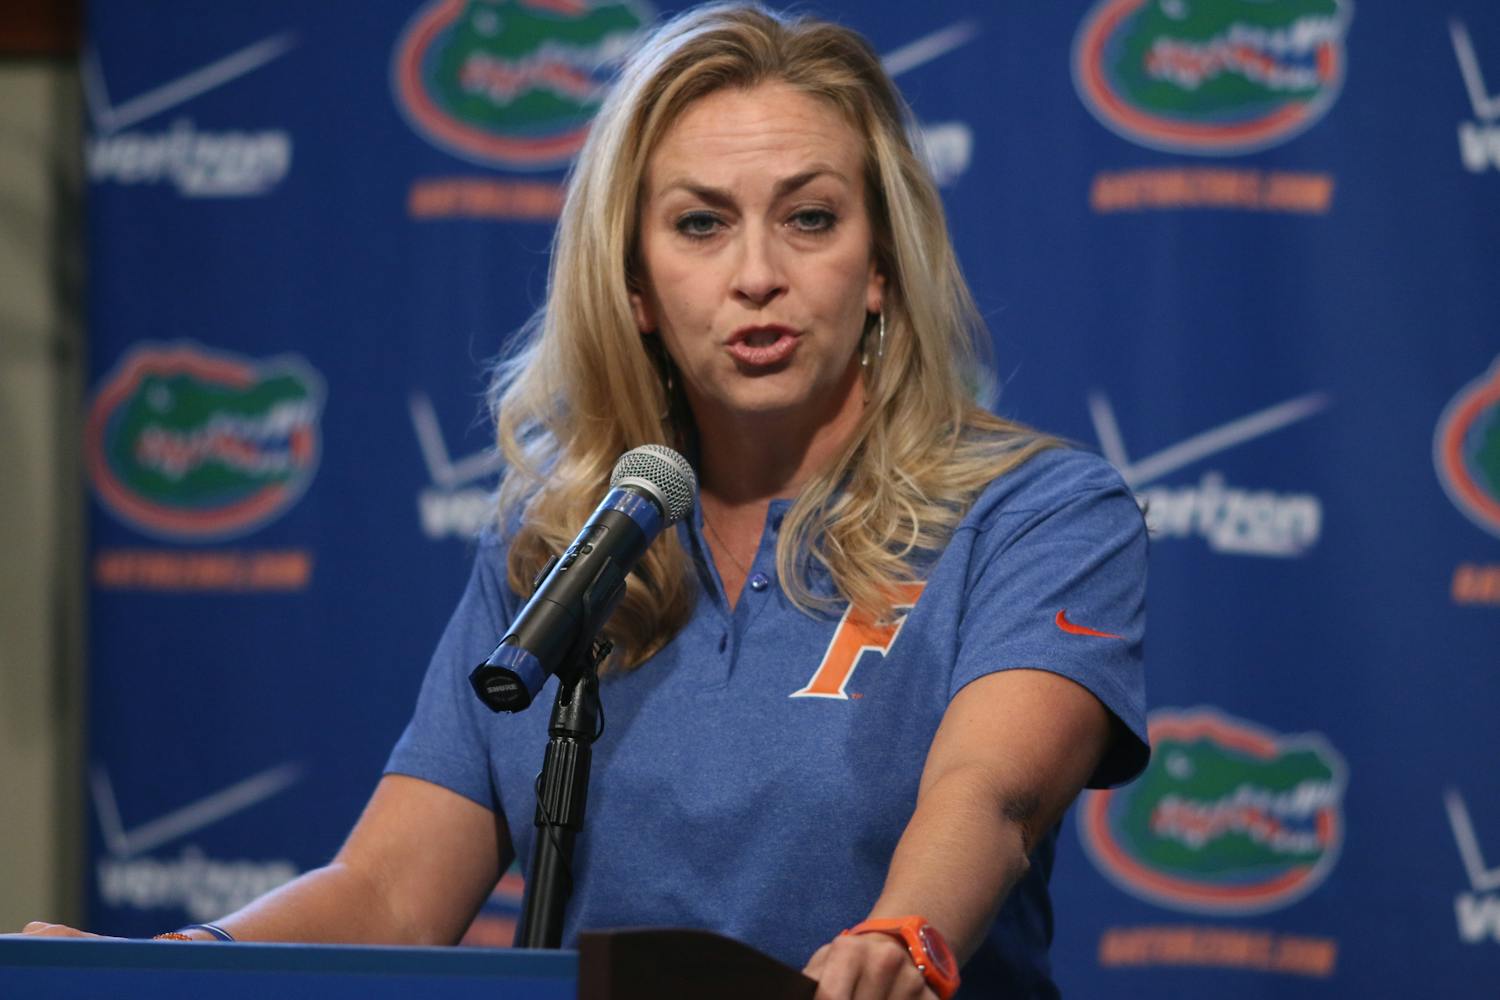 UF coach Amanda Butler speaks with the media during the Florida women’s basketball team’s annual media day at the University Women’s Club on Oct. 9.